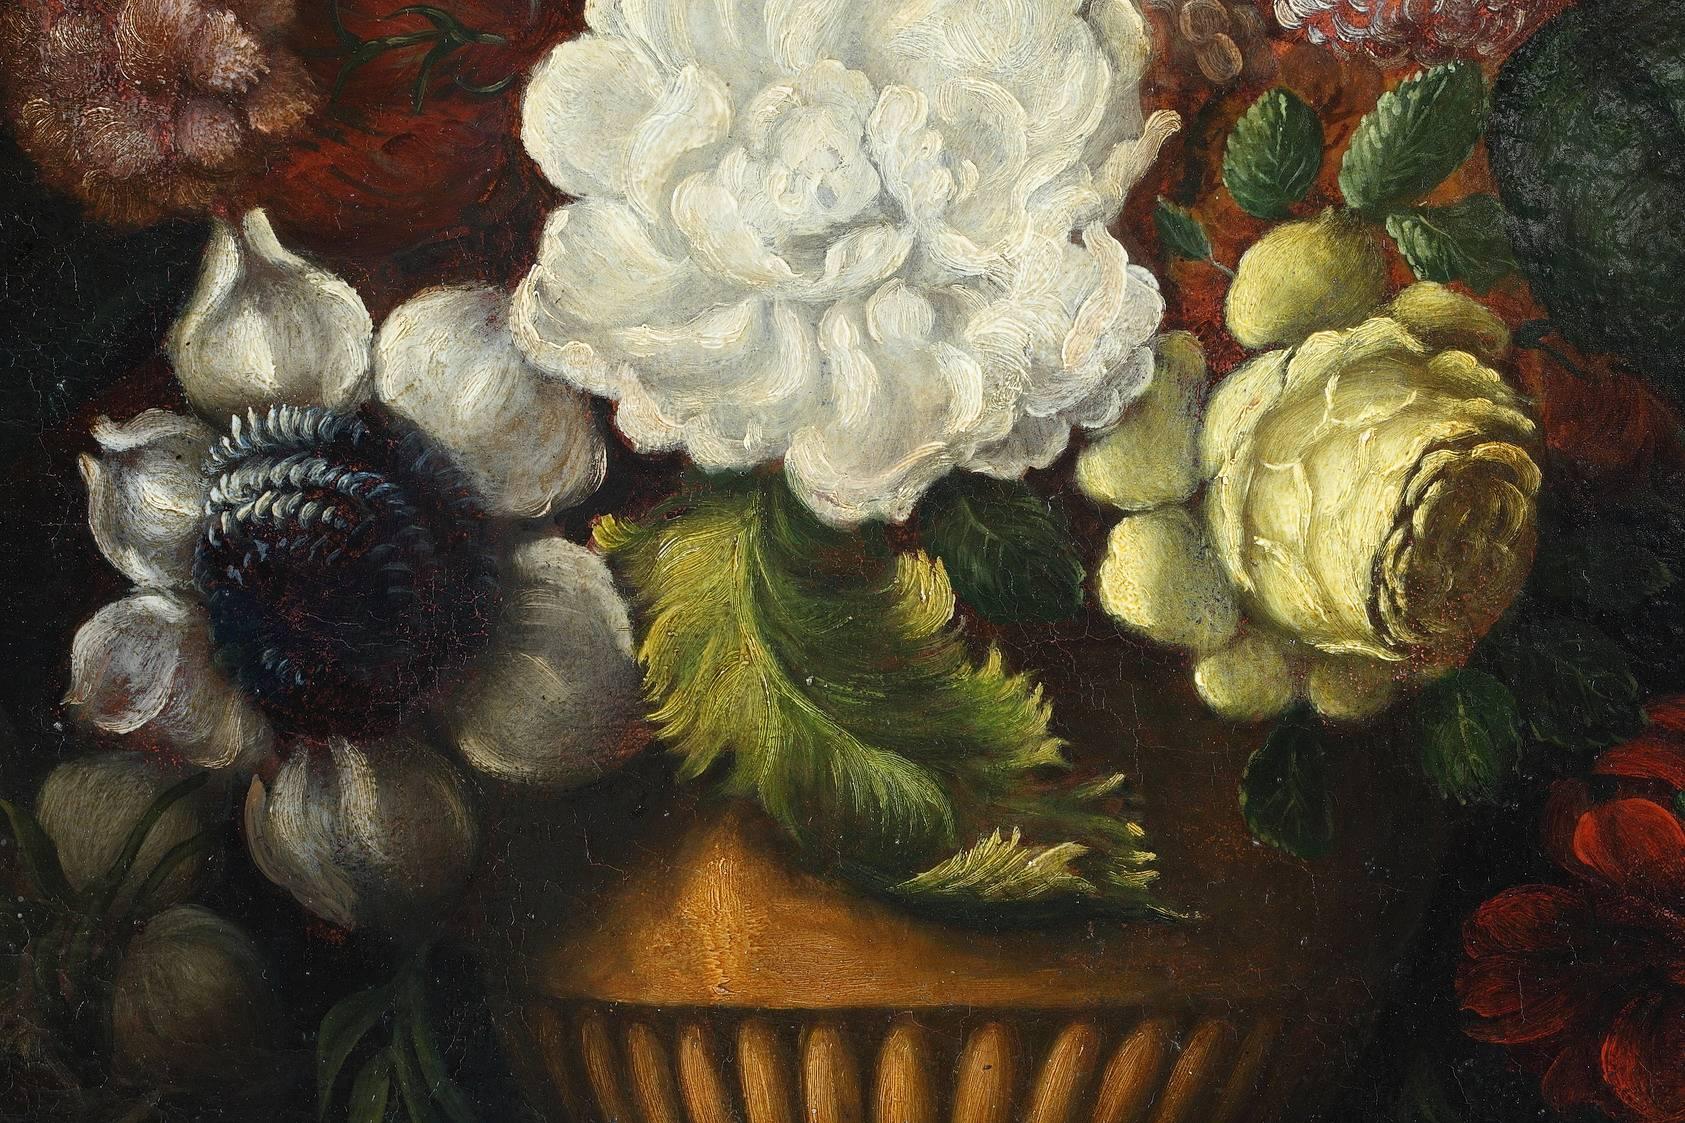 French 19th Century Paintings Flower Bouquets in the Dutch School Style